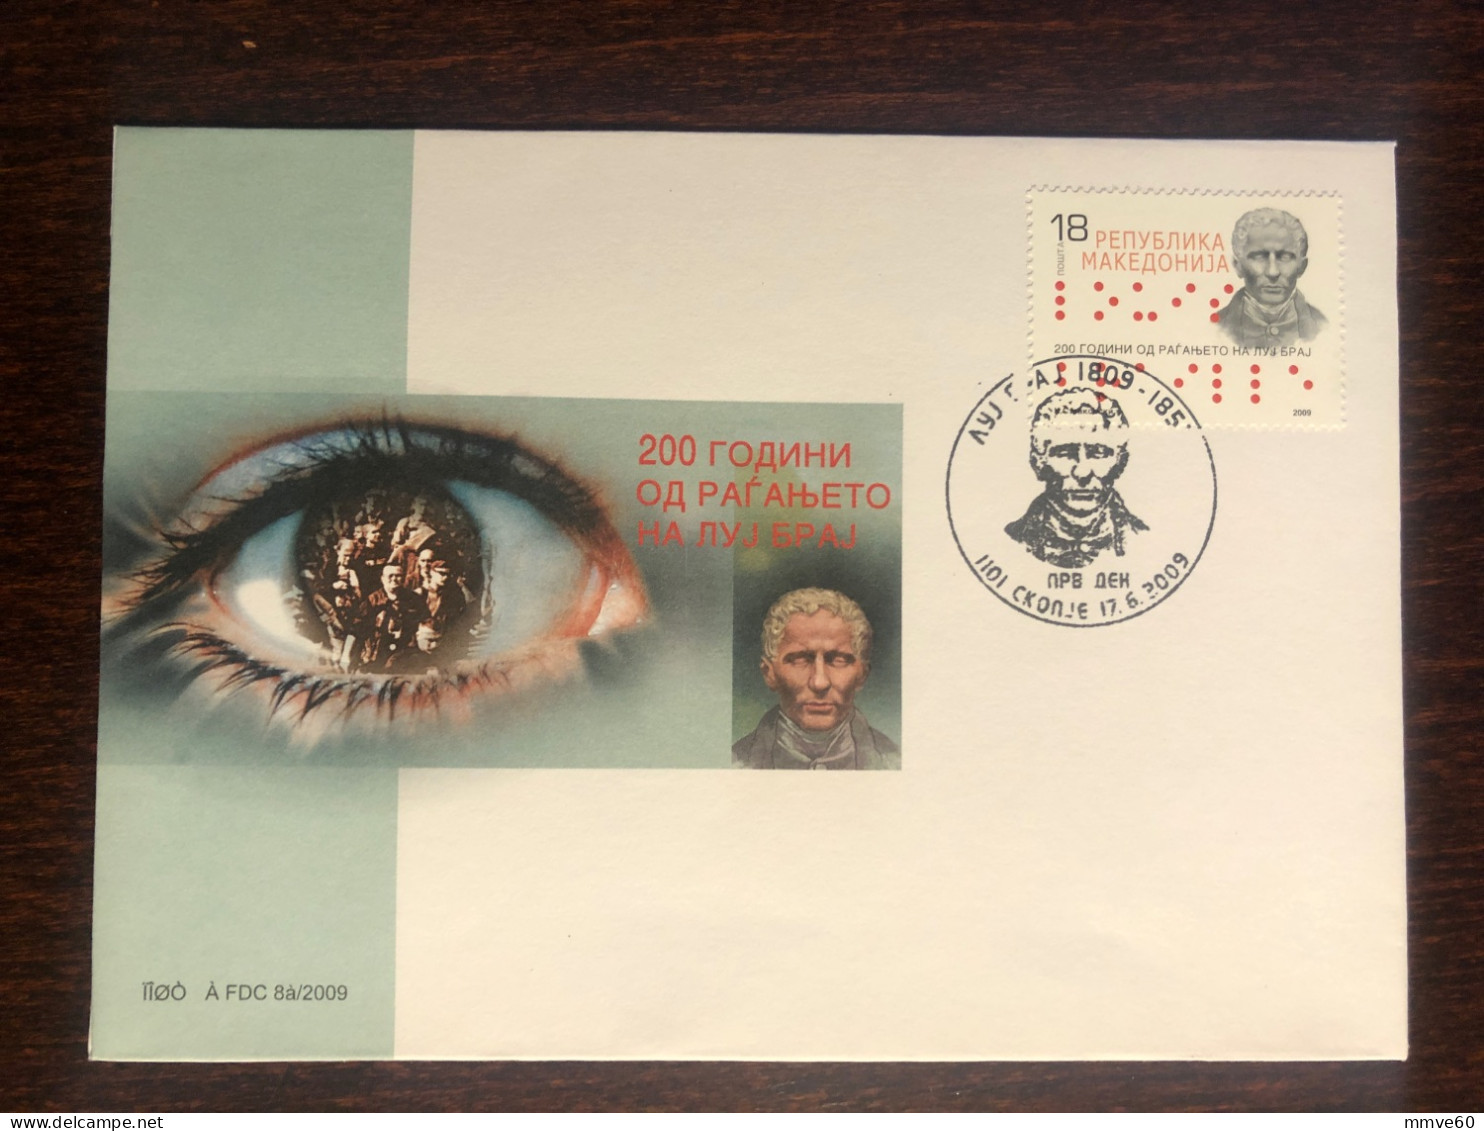 MACEDONIA FDC COVER 2009 YEAR  BLINDNESS BLIND BRAILLE HEALTH MEDICINE STAMPS - Nordmazedonien